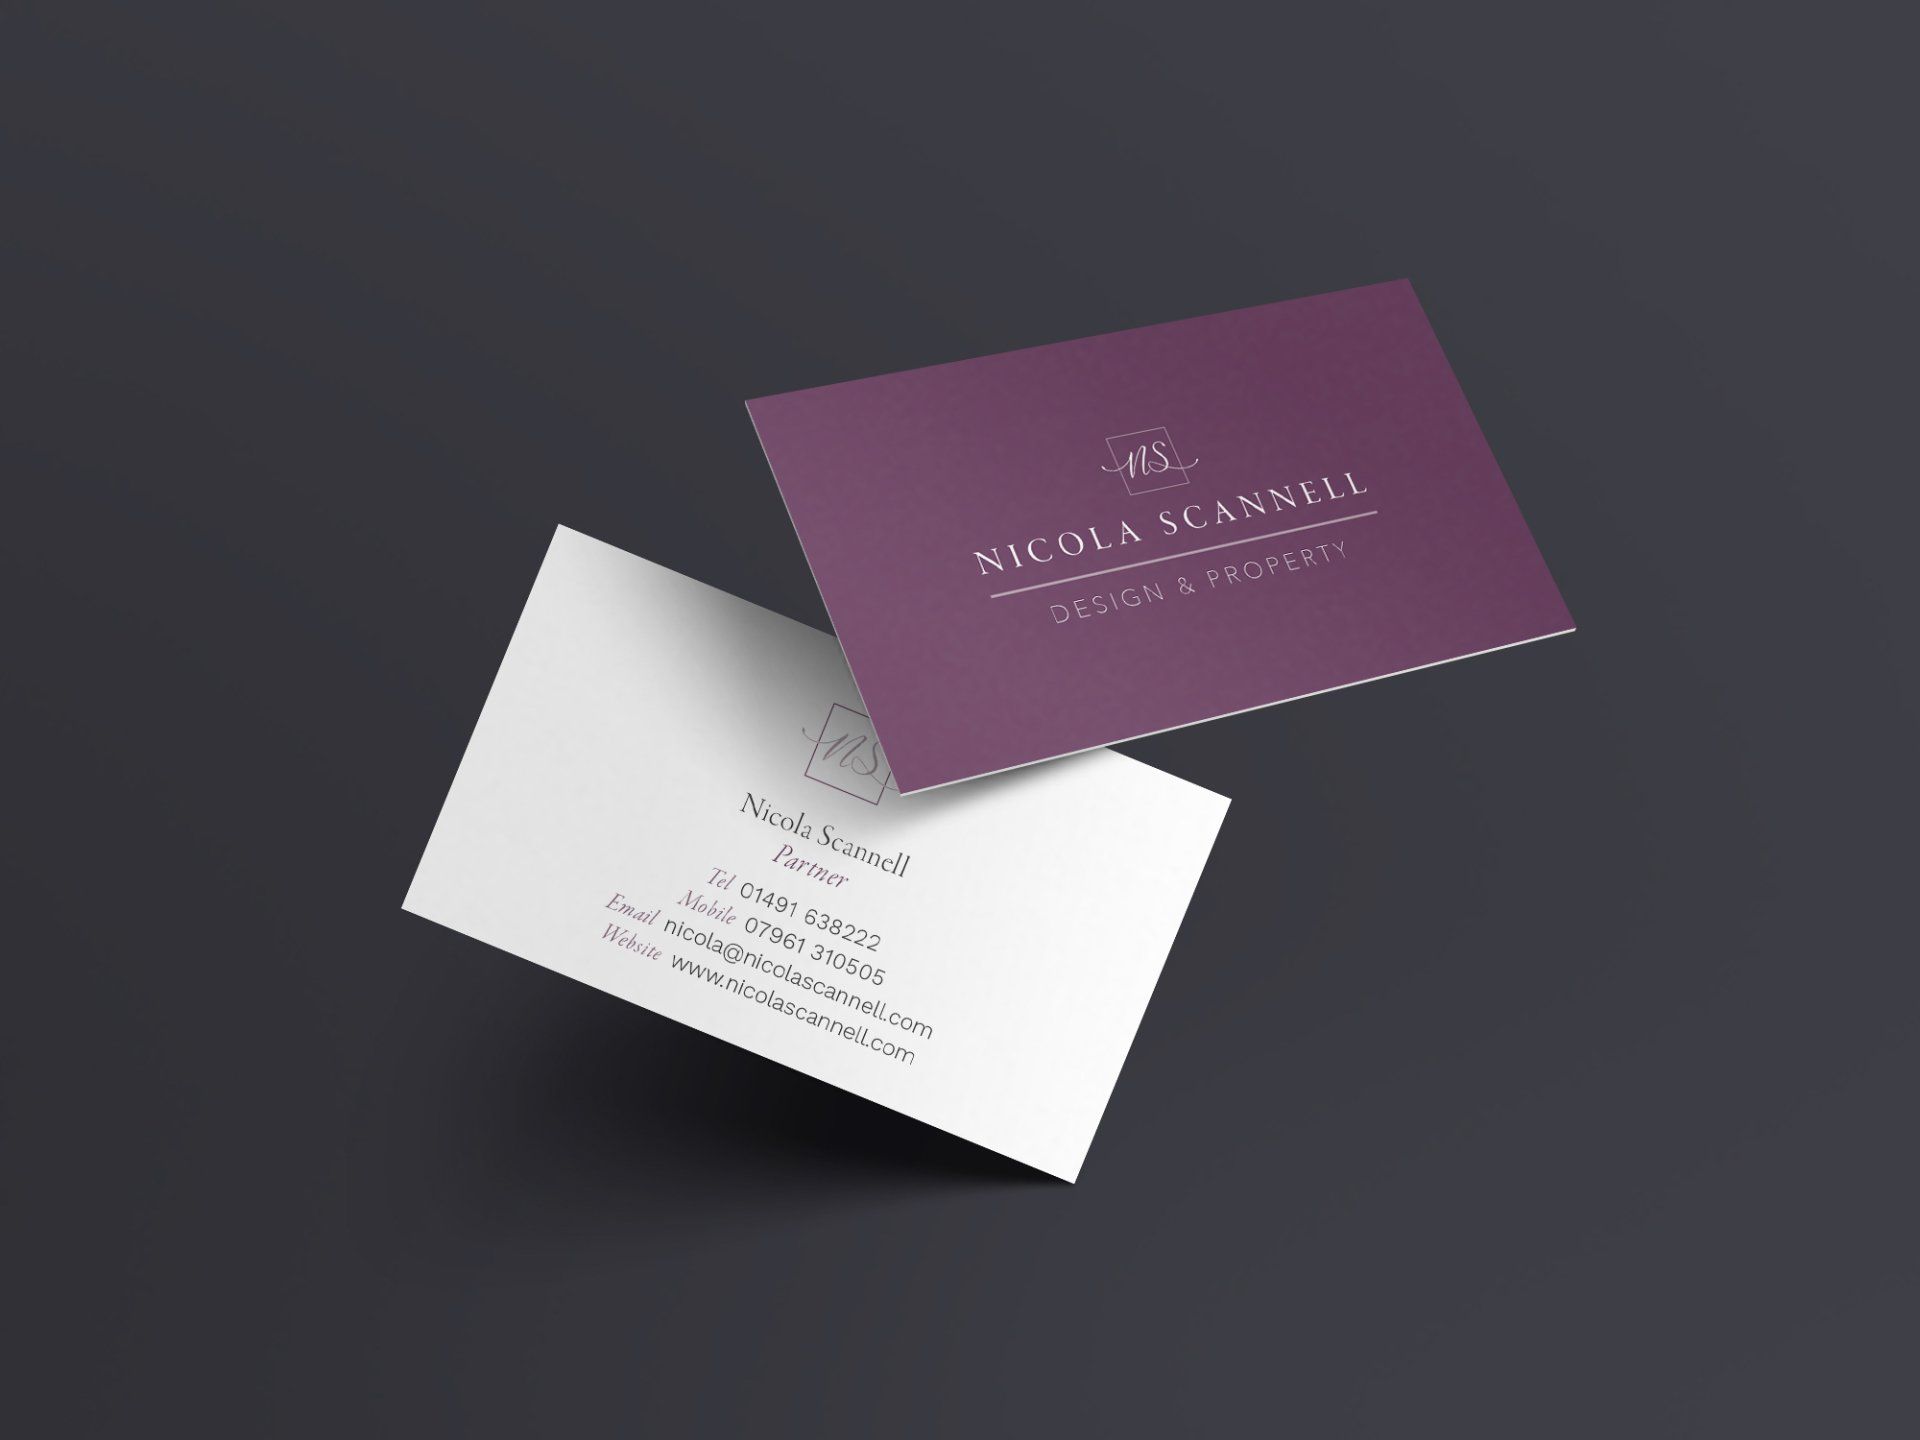 Nicola Scannell's business cards